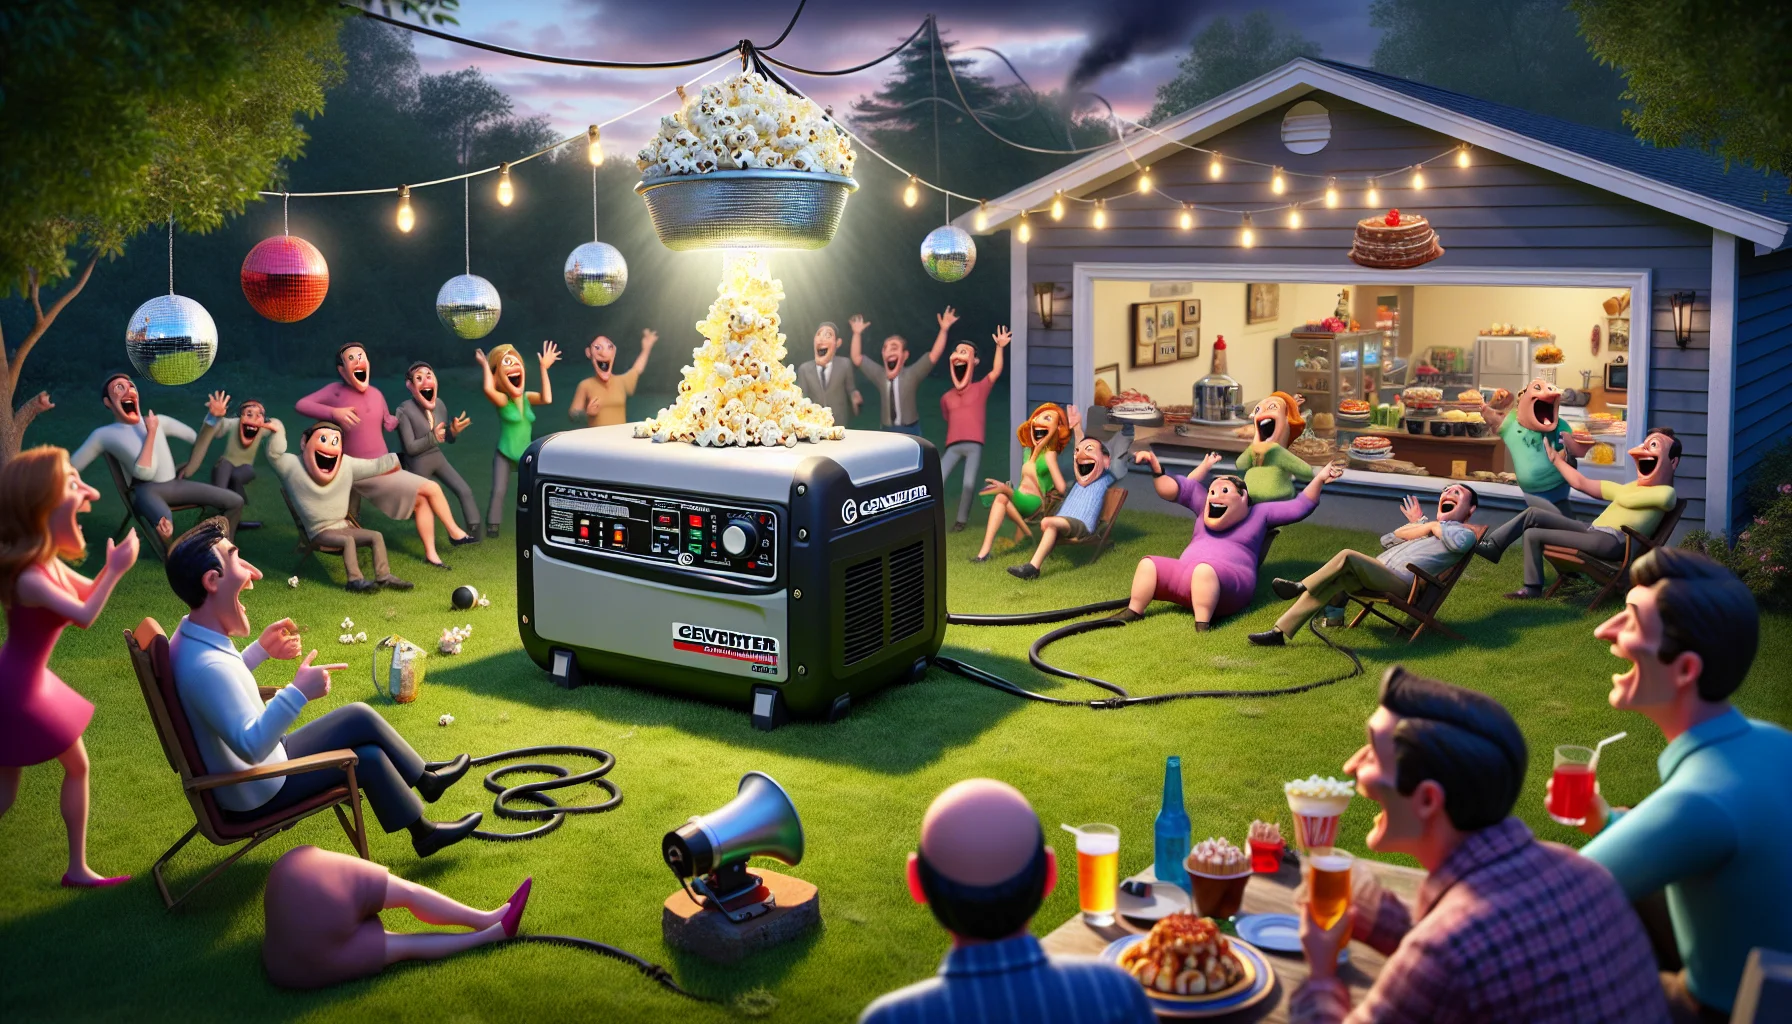 A humorous scenario at an amiable neighborhood outdoor gathering. In the center of the scene is a powerful, nondescript branded inverter generator, designed to resemble the model known typically as eu7000is. The generator, with control panel indicators glowing invitingly, is powering various funny and unexpected objects: a popcorn machine overflowing onto the lawn, a disco ball hanging from a tree branch, and a fridge filled with desserts. Bemused neighbors are laughing and pointing at the spectacle, shaking their heads in amusement. The overall effect is to suggest the lure and enchantment of generating one's own electricity.